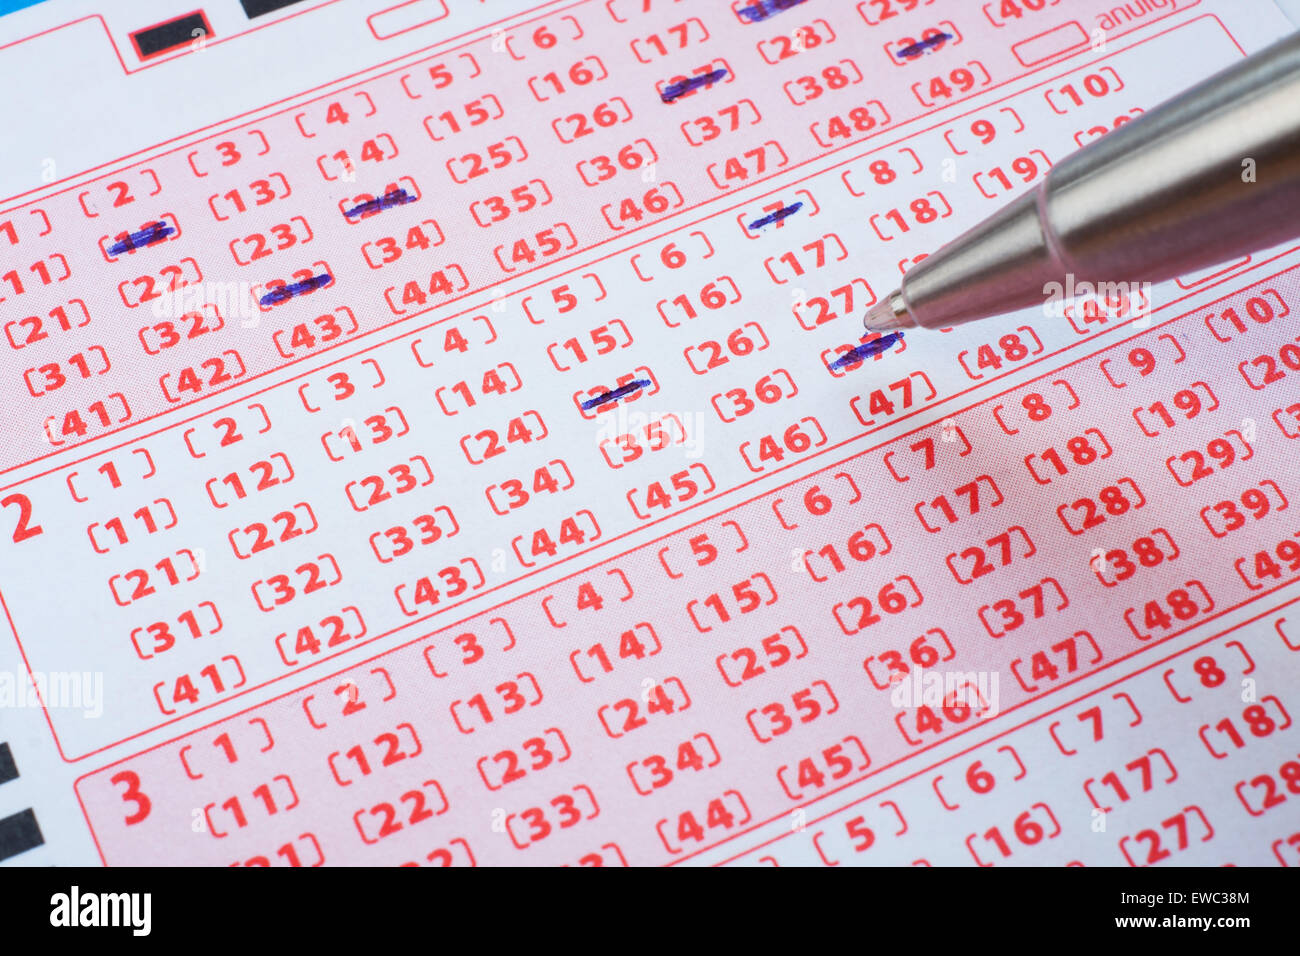 Lotto ticket with marked numbers Stock Photo